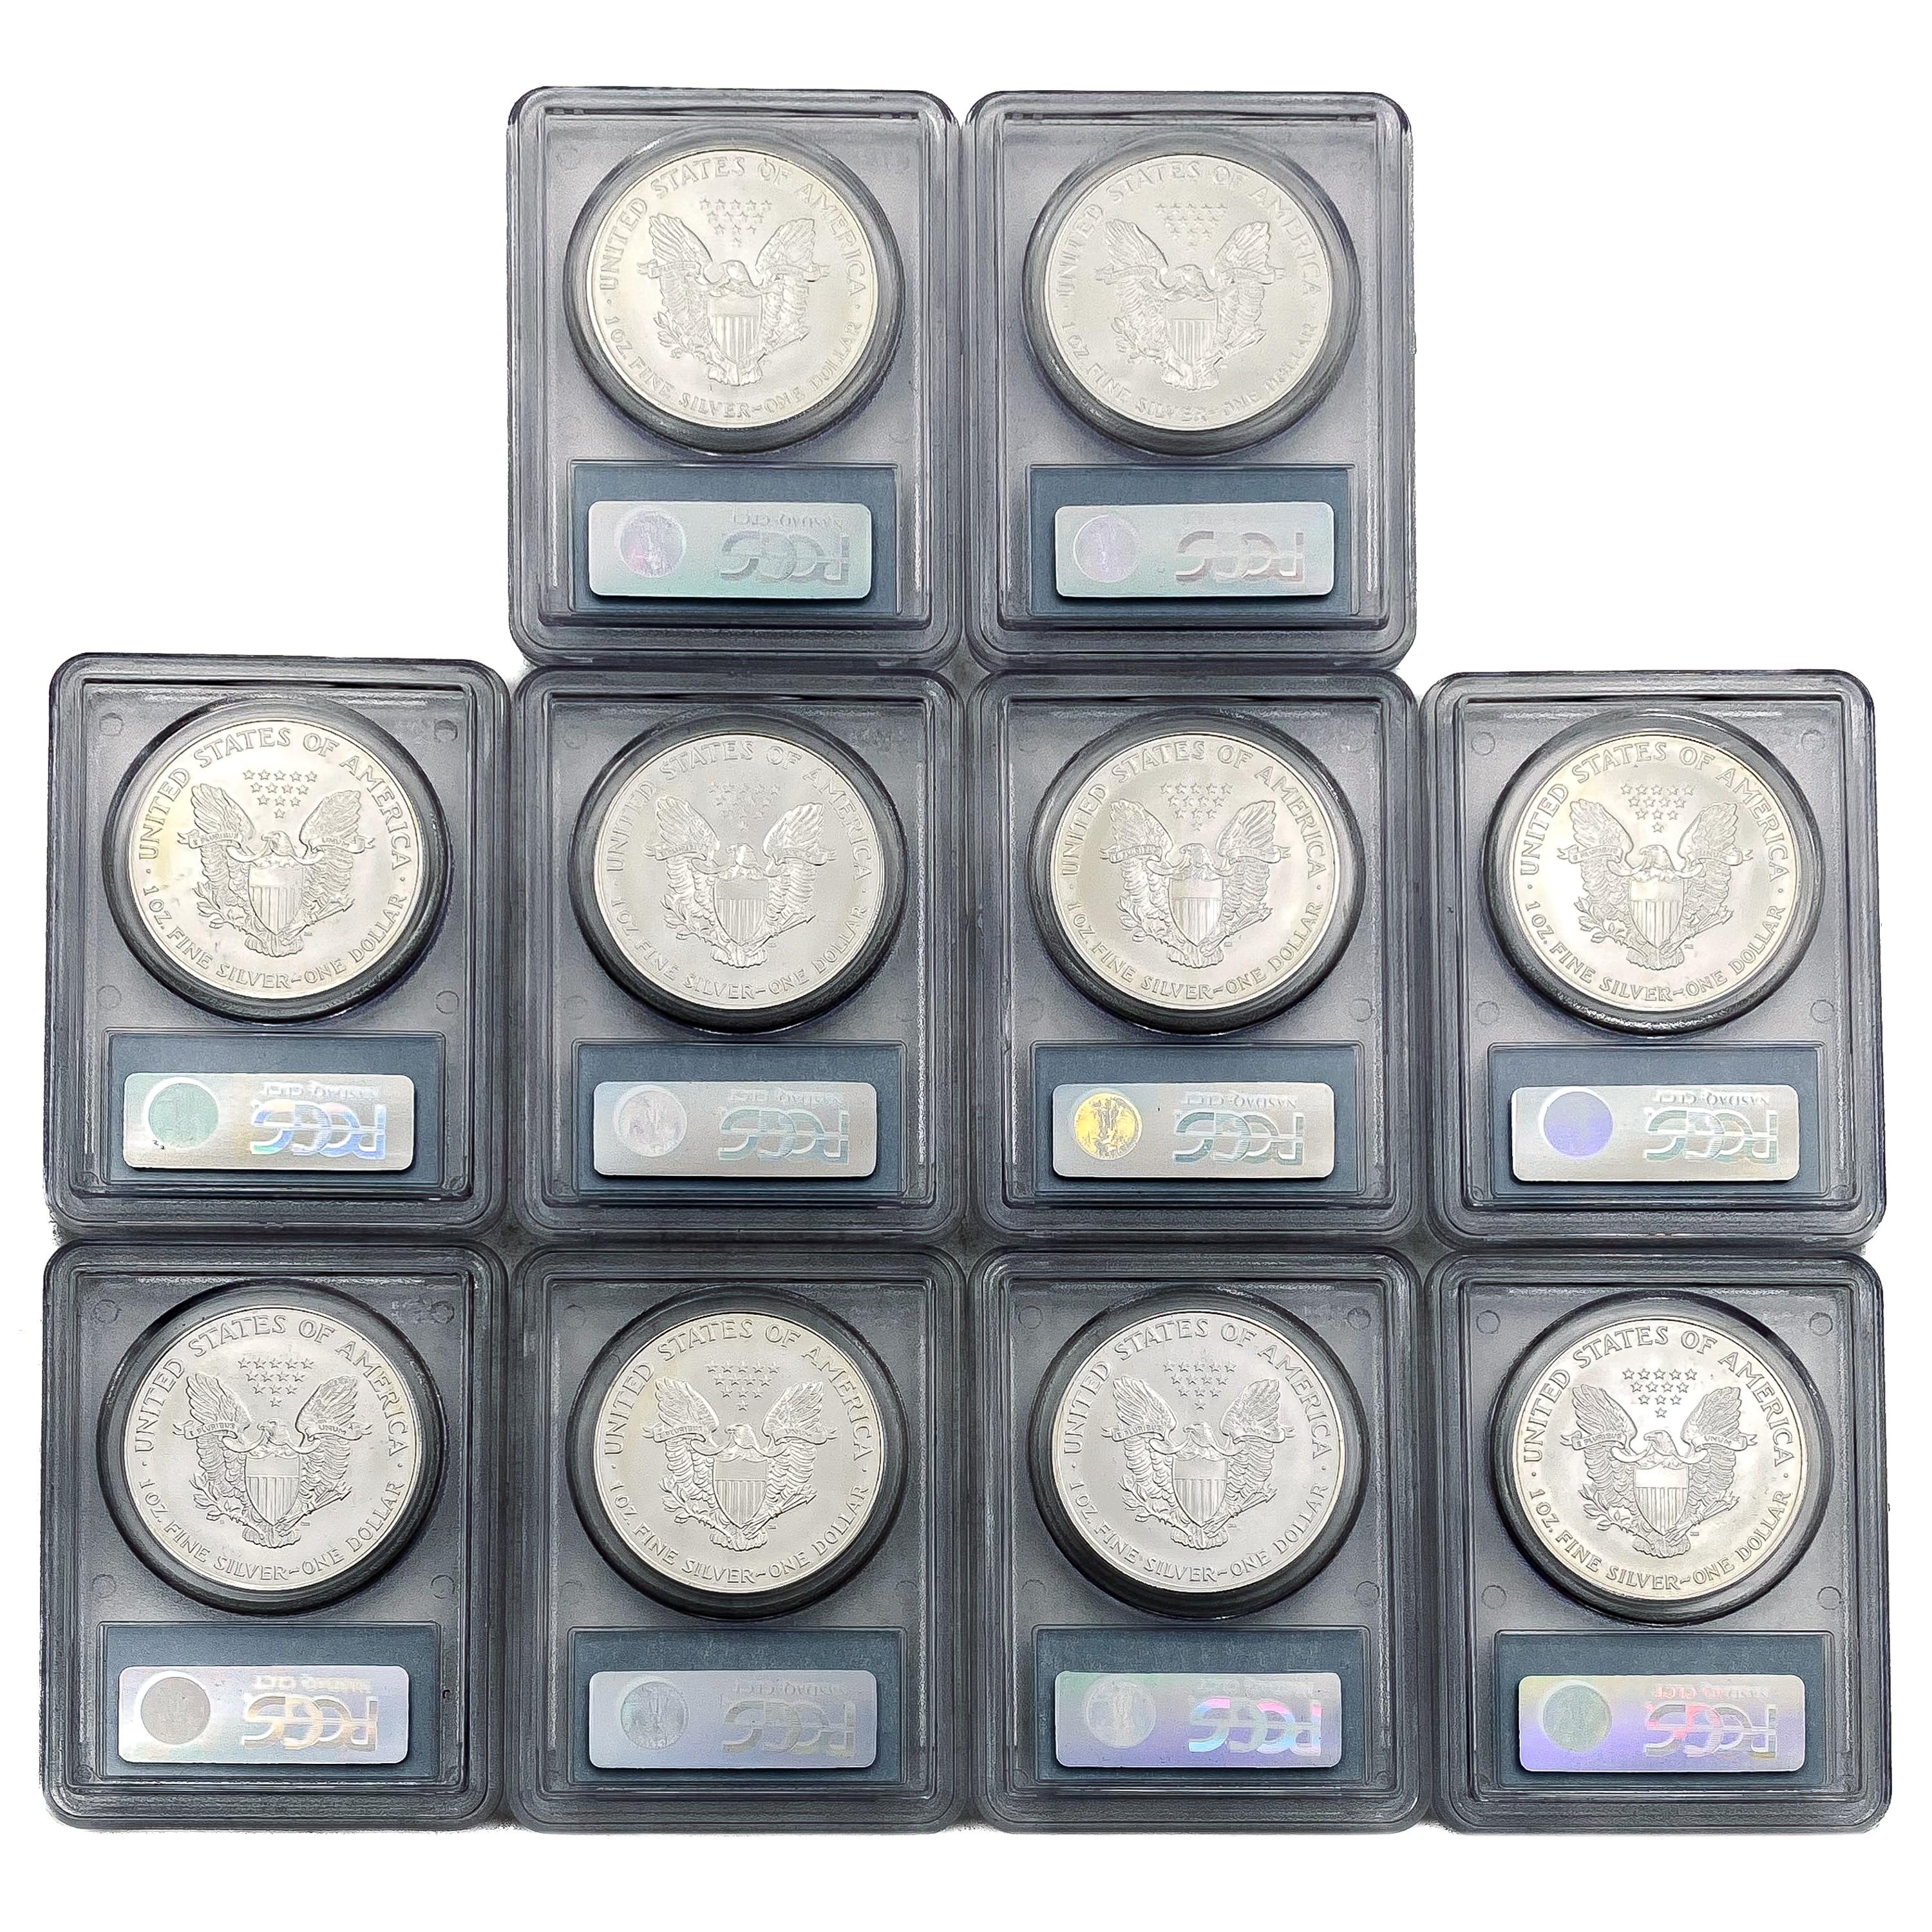 1994 American Silver Eagles PCGS MS69 [8 Coins]